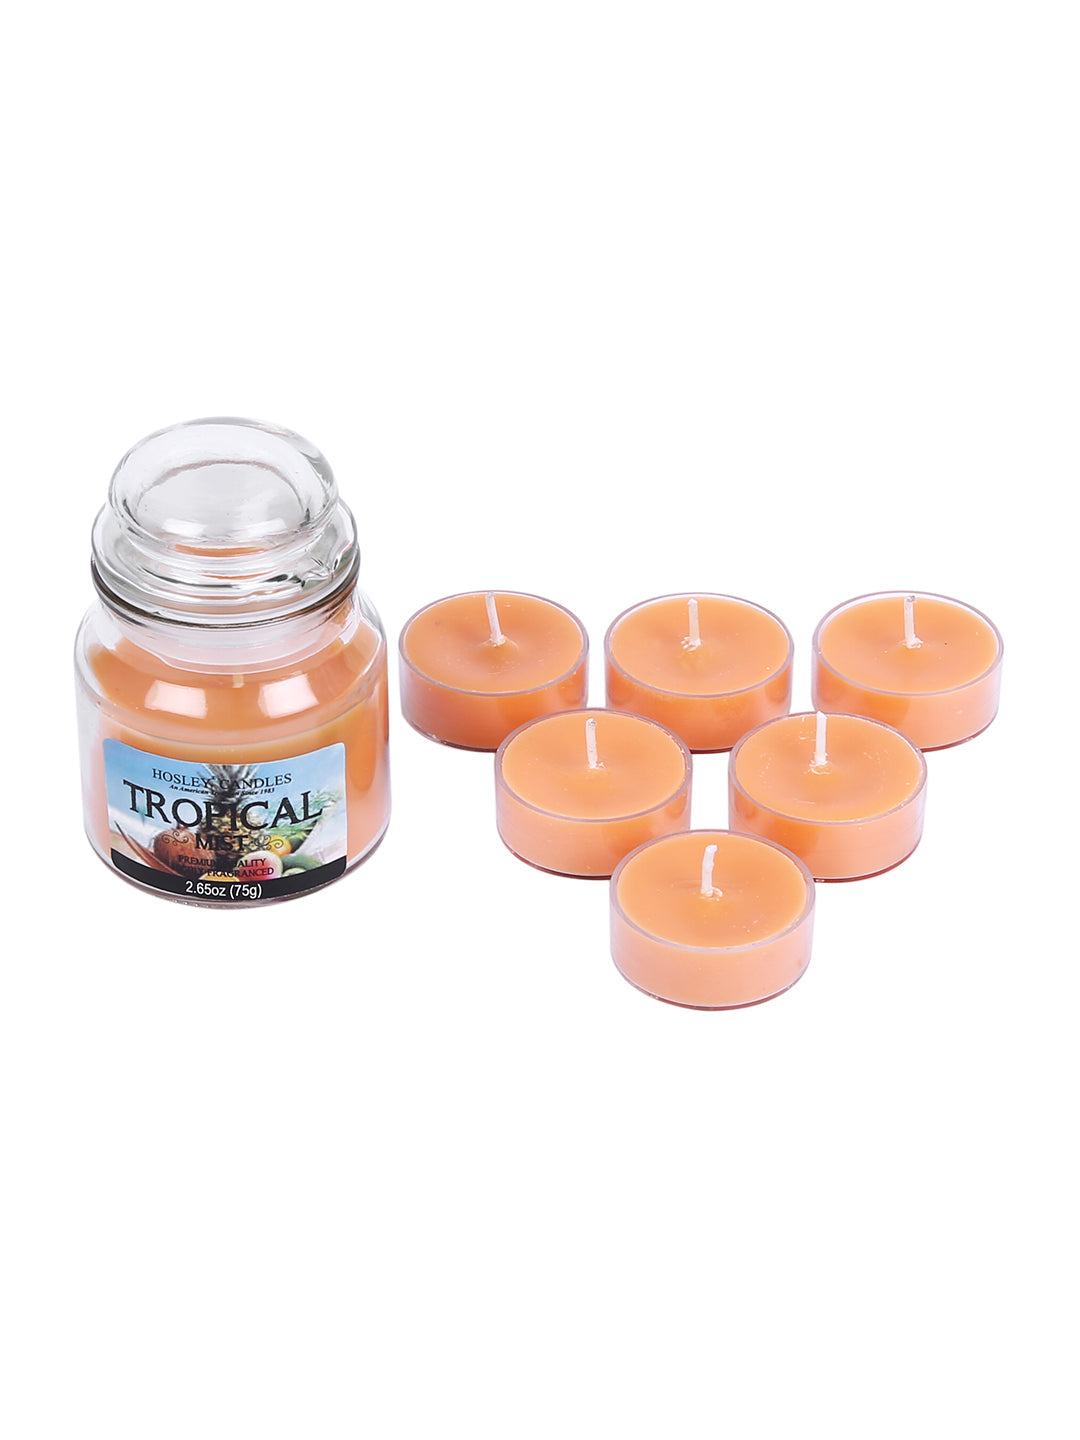 Hosley® Tropical Mist Highly Fragranced, 2.65 Oz wax, Jar Candle with Pack of 6-Pieces Scented Tealights